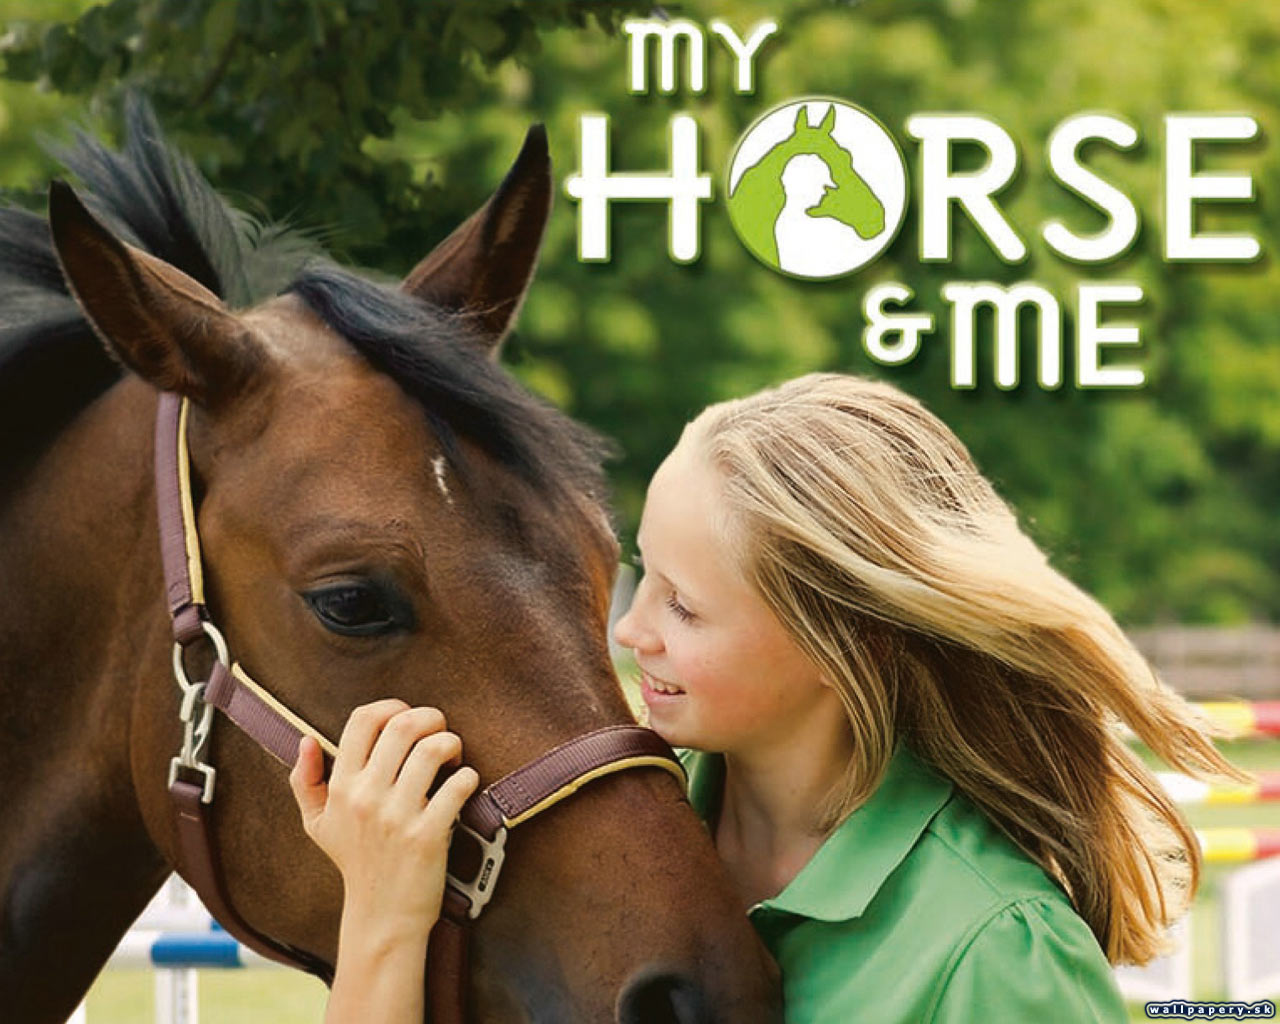 My Horse and Me - wallpaper 1